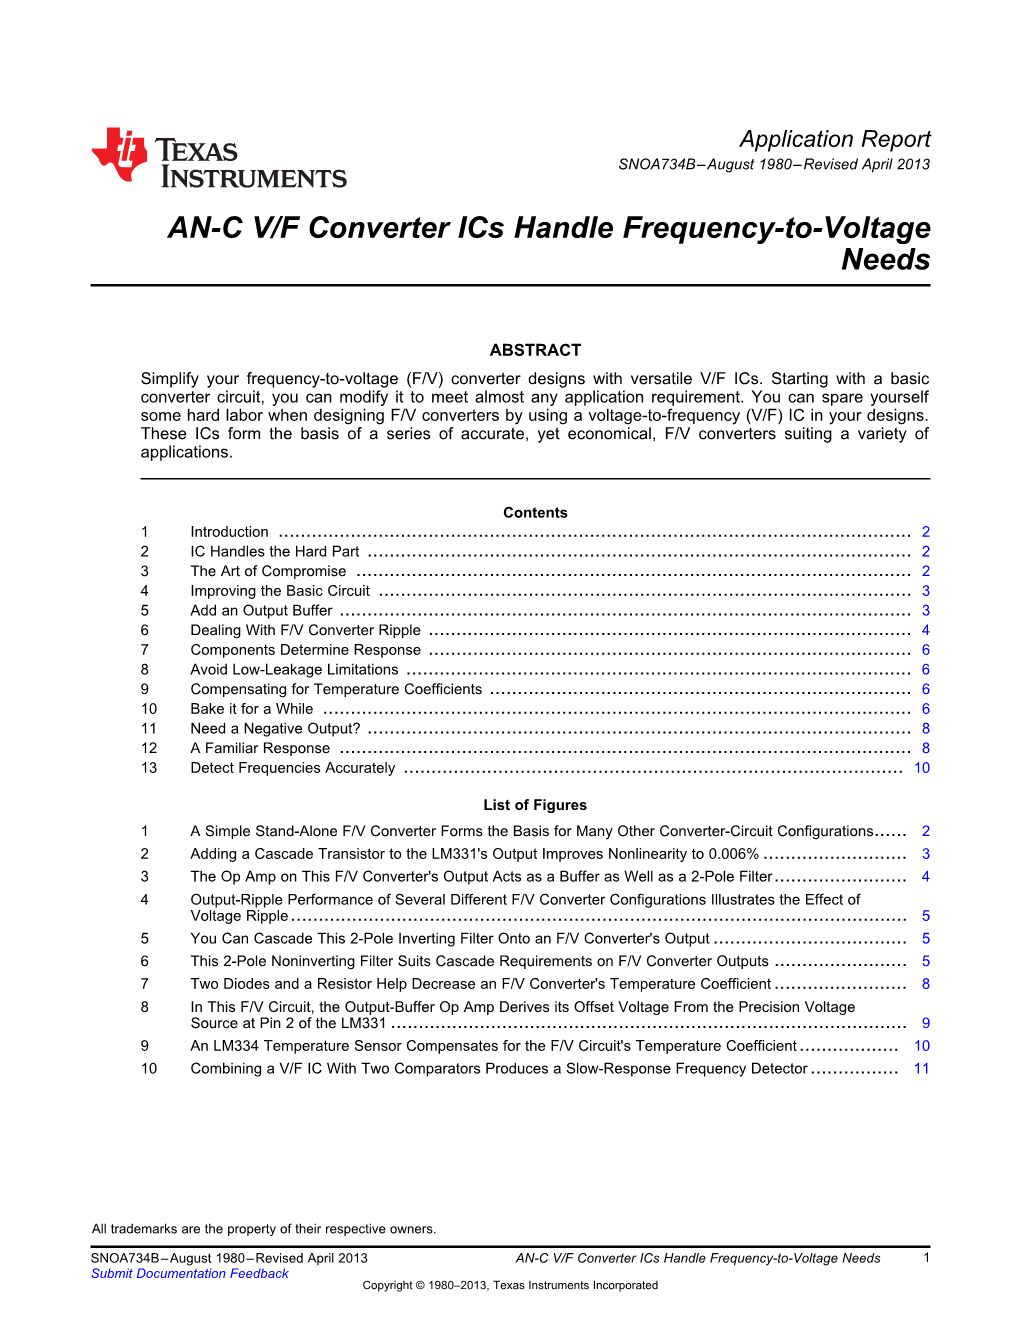 AN-C V/F Converter Ics Handle Frequency-To-Voltage Needs